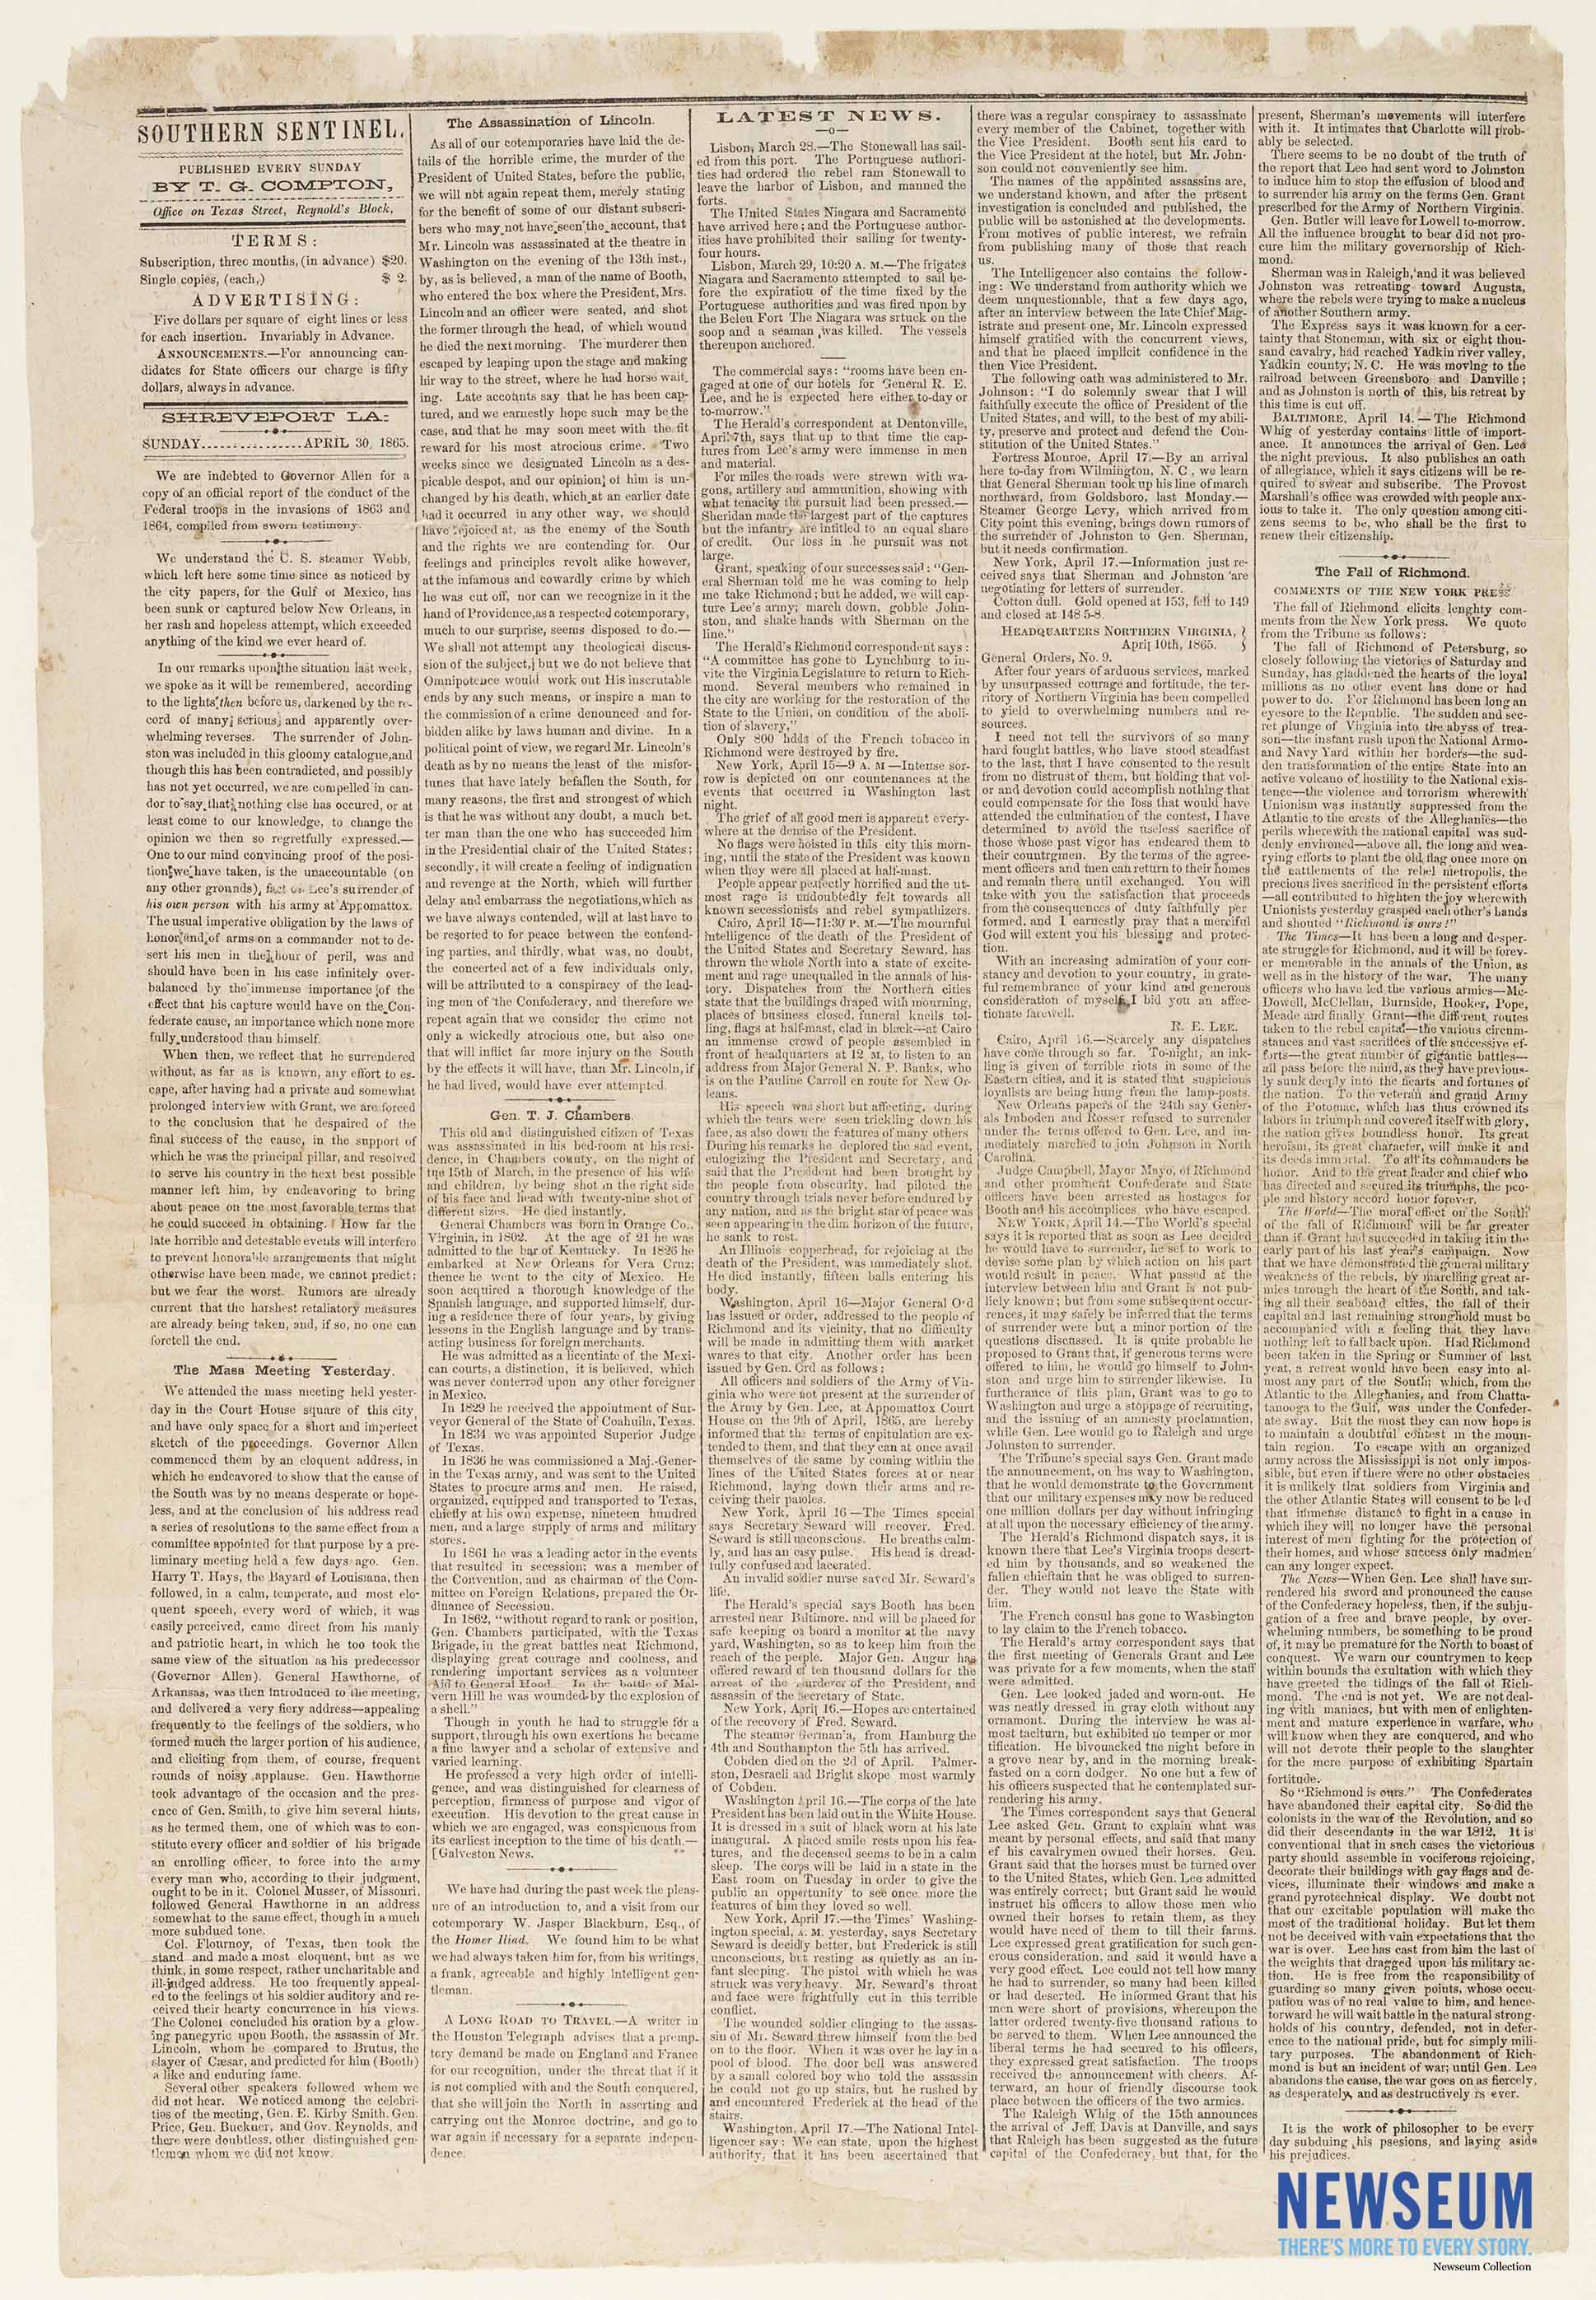 The Southern Sentinel, April 30, 1865